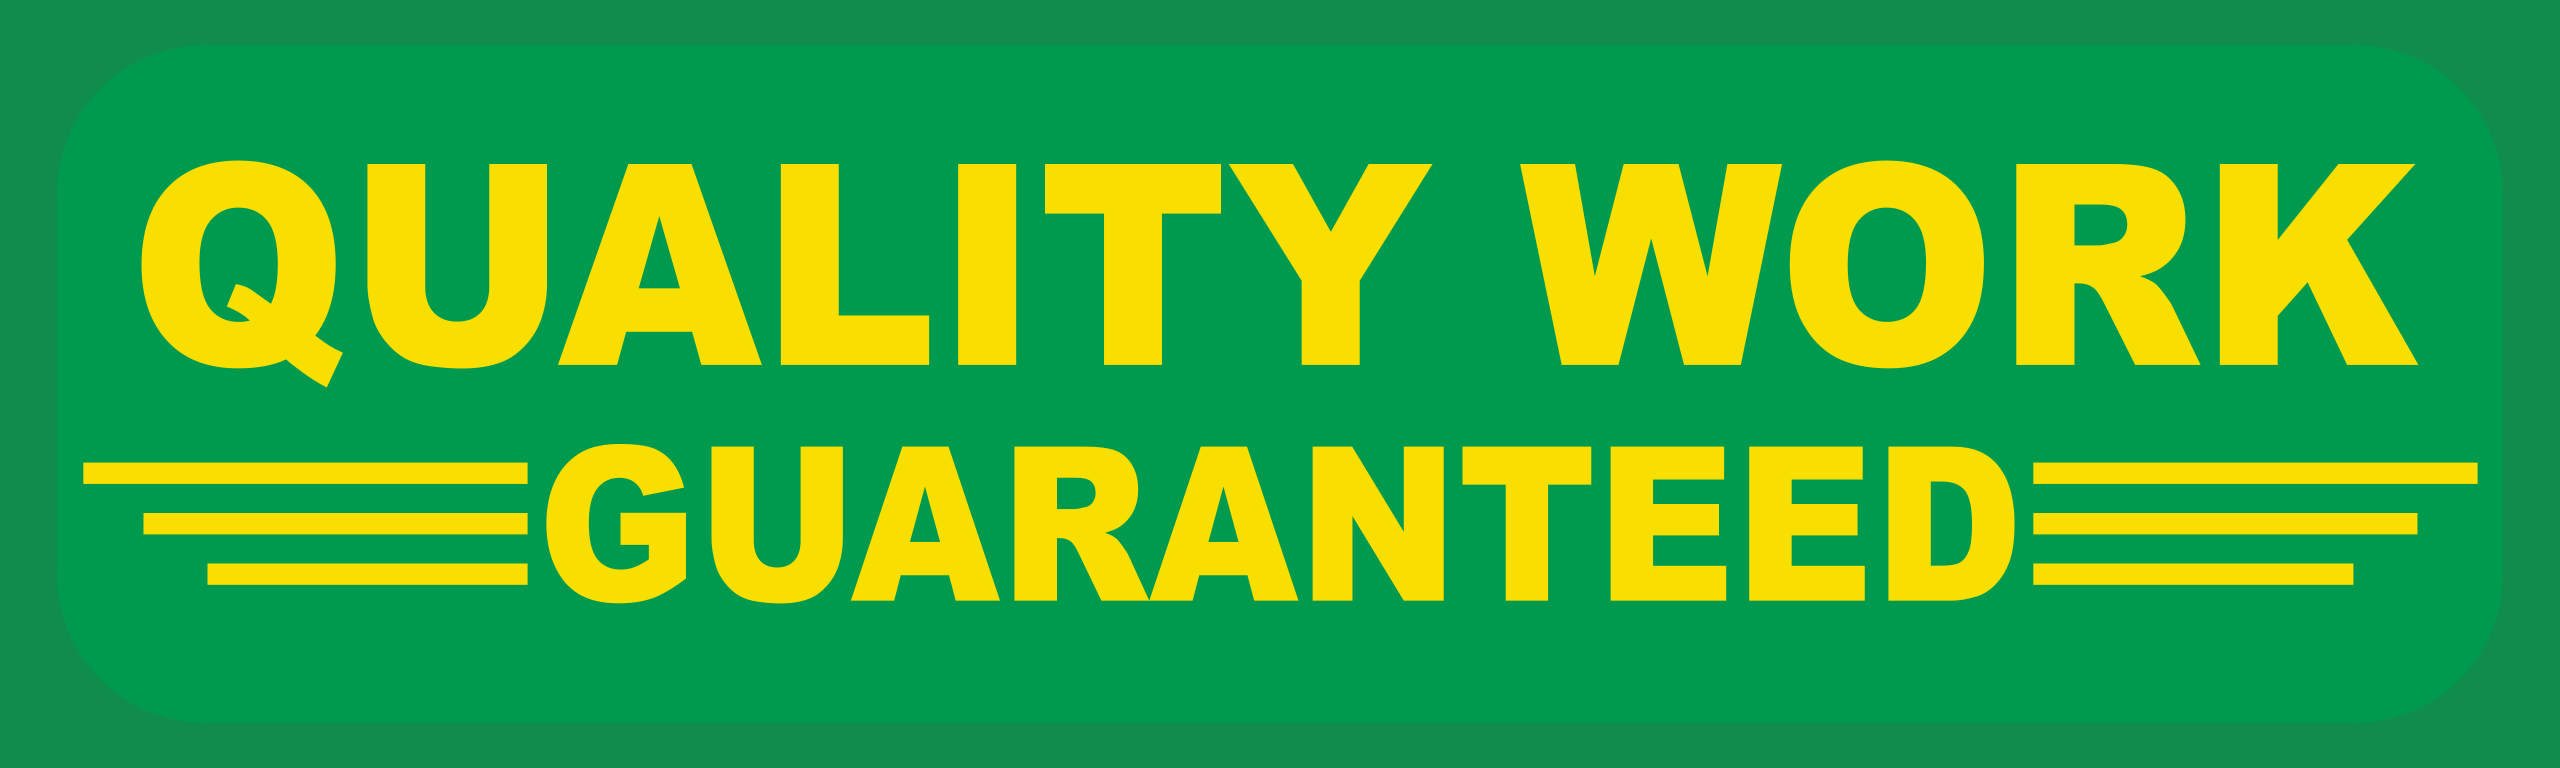 QUALITY WORK GUARANTEED BANNER